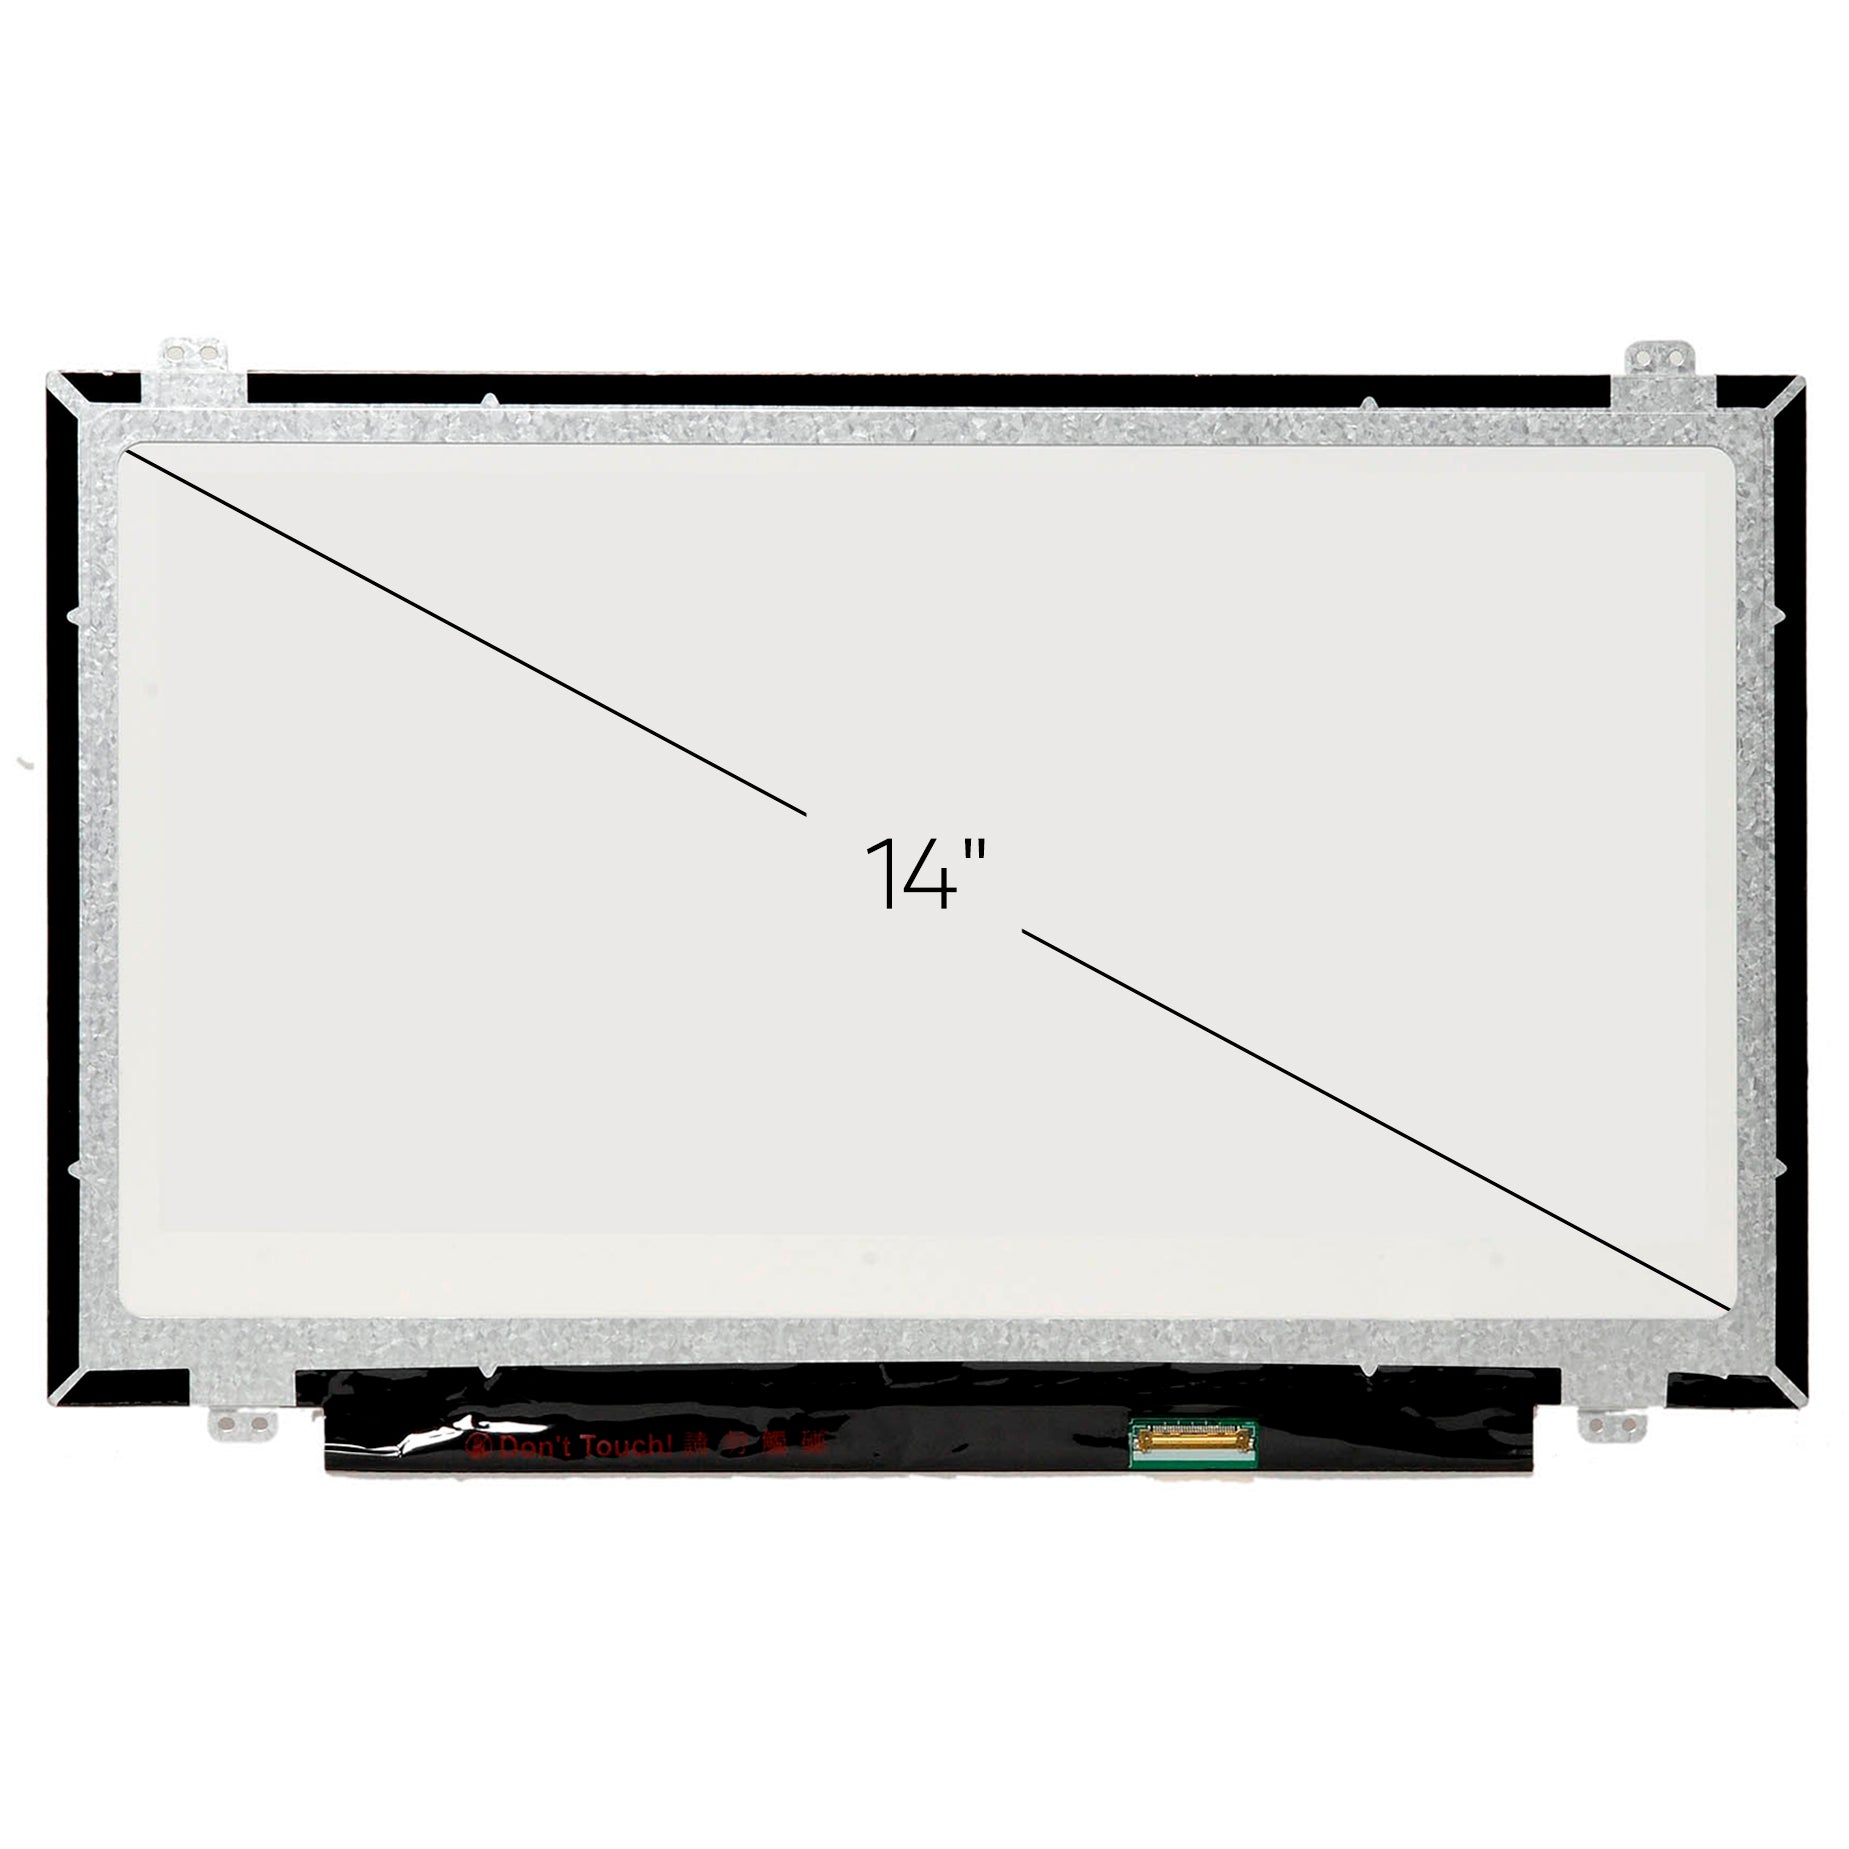 Screen Replacement for N140BGE-E33 REV.C1 HD 1366x768 Glossy LCD LED Display